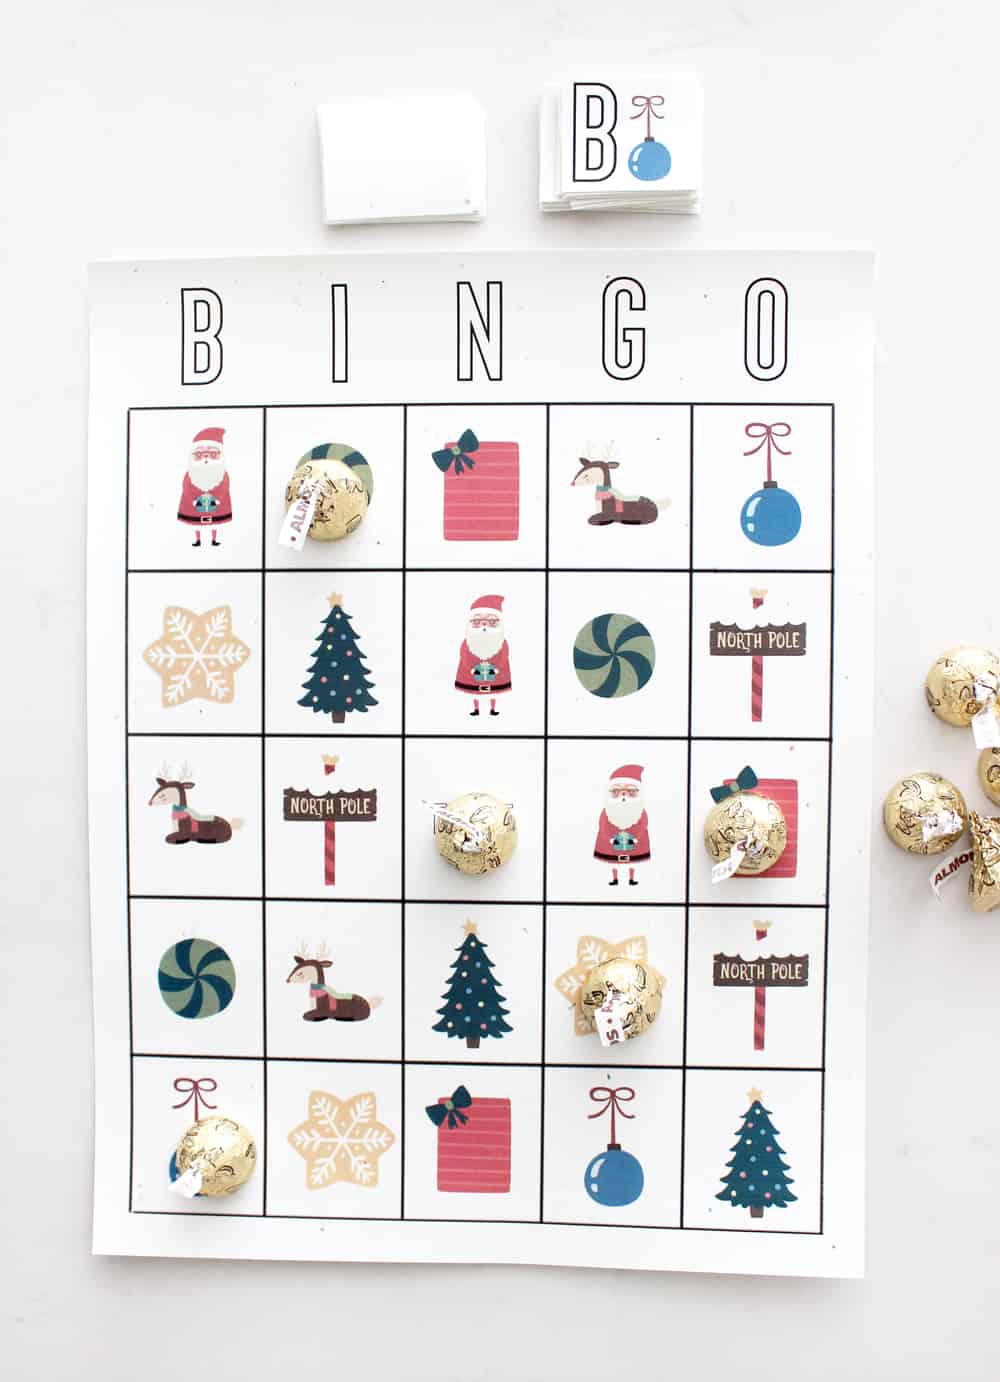 A Christmas Bingo card with chocolate kiss markers covering some of the squares.